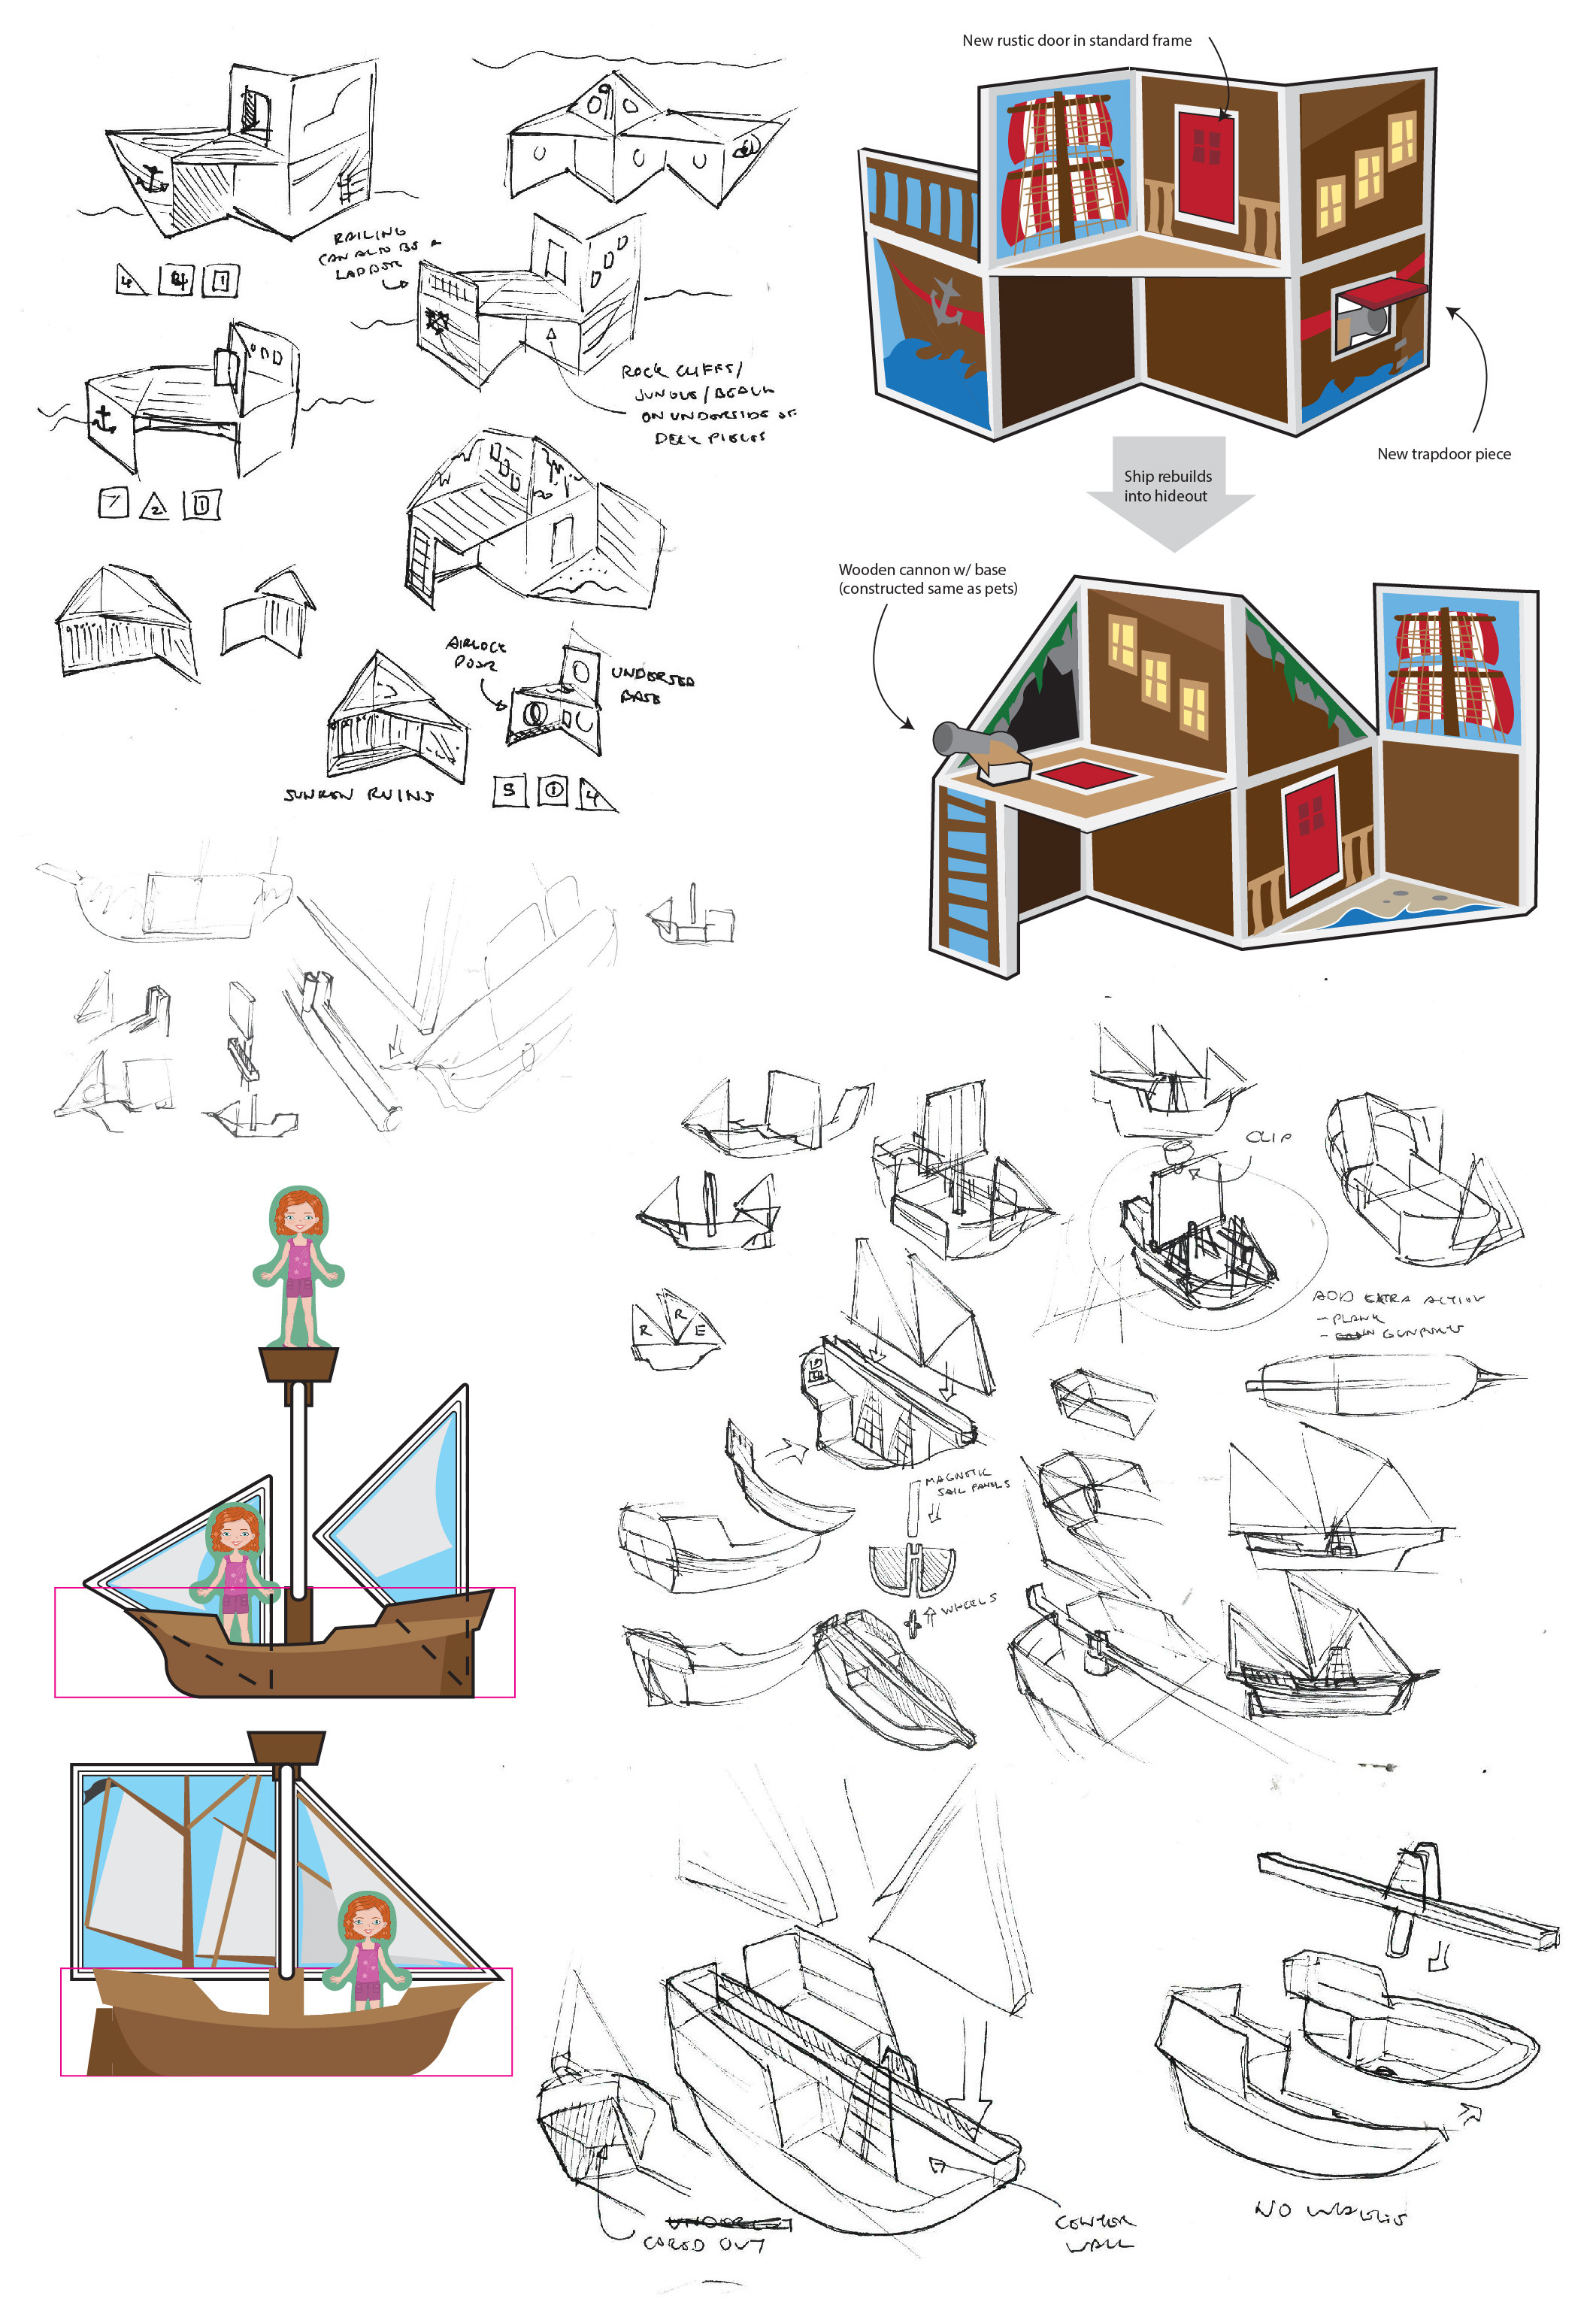 Development sketches for Pirate Cove set. The ship itself was initially going to be constructed from panels, but I opted for a molded plastic piece with panels for sails.